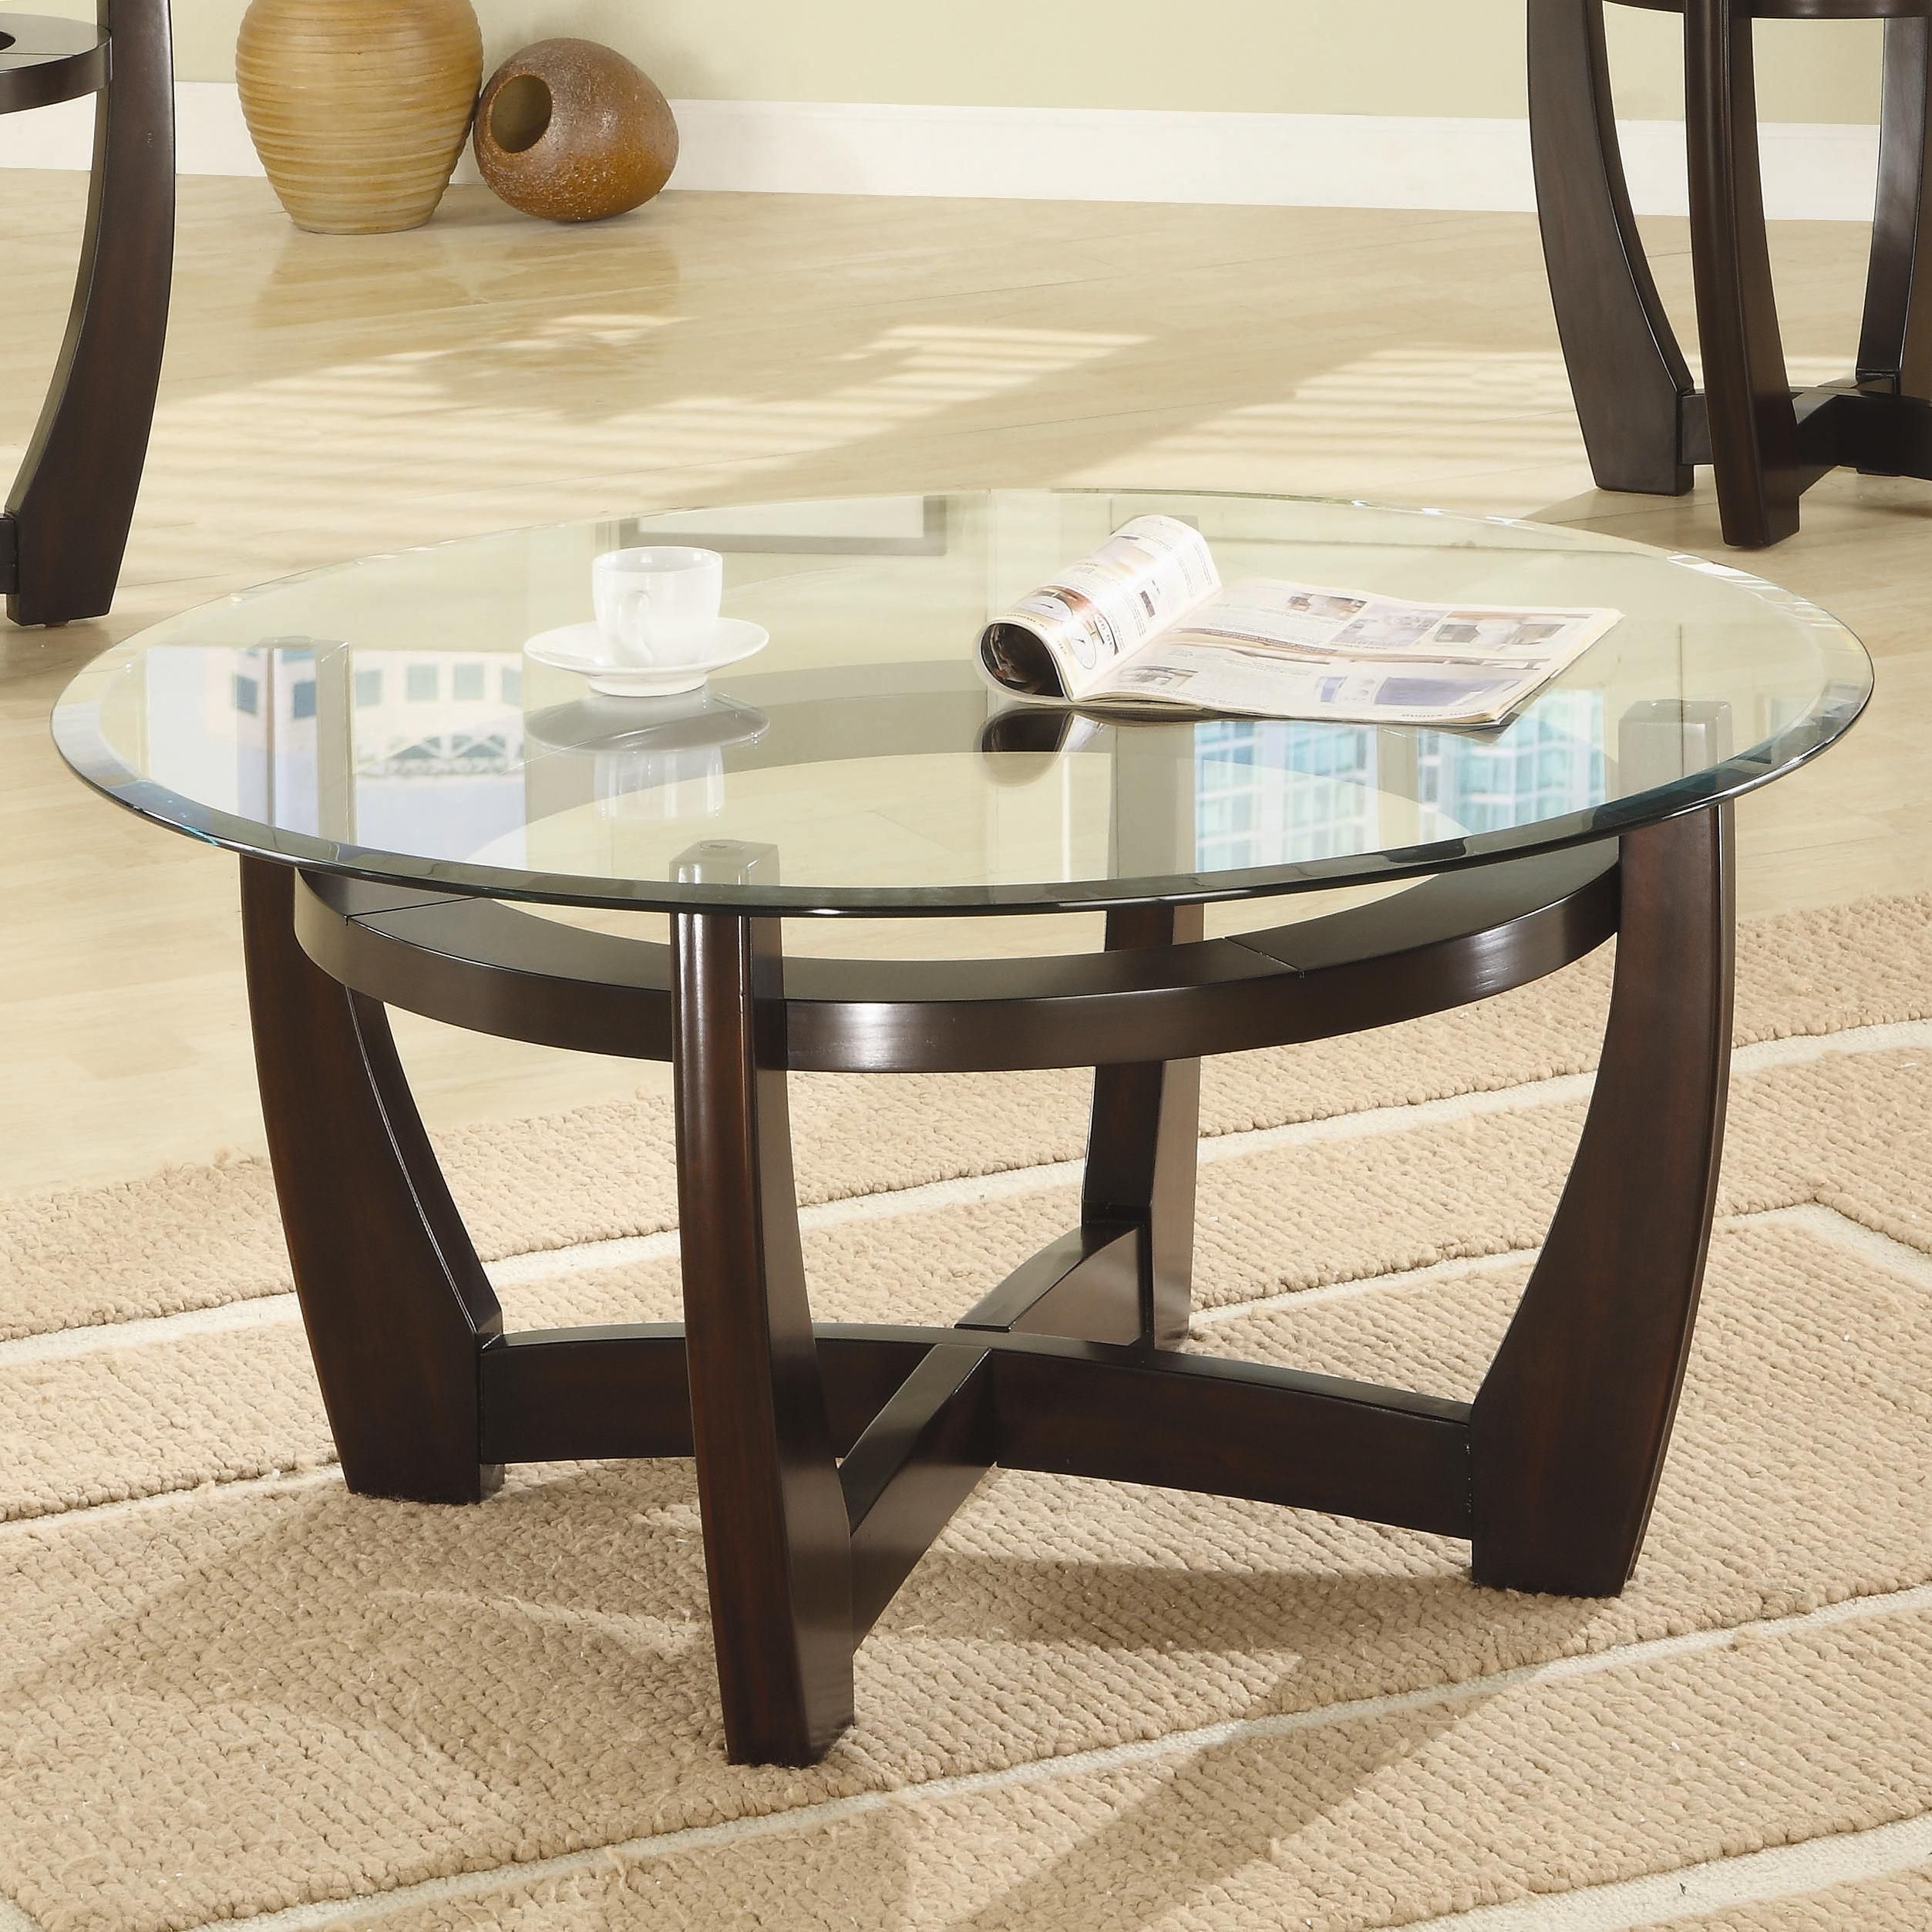 Contemporary 3 Piece Occasional Table Set With Glass Tops Throughout Occasional Coffee Tables (Gallery 3 of 20)